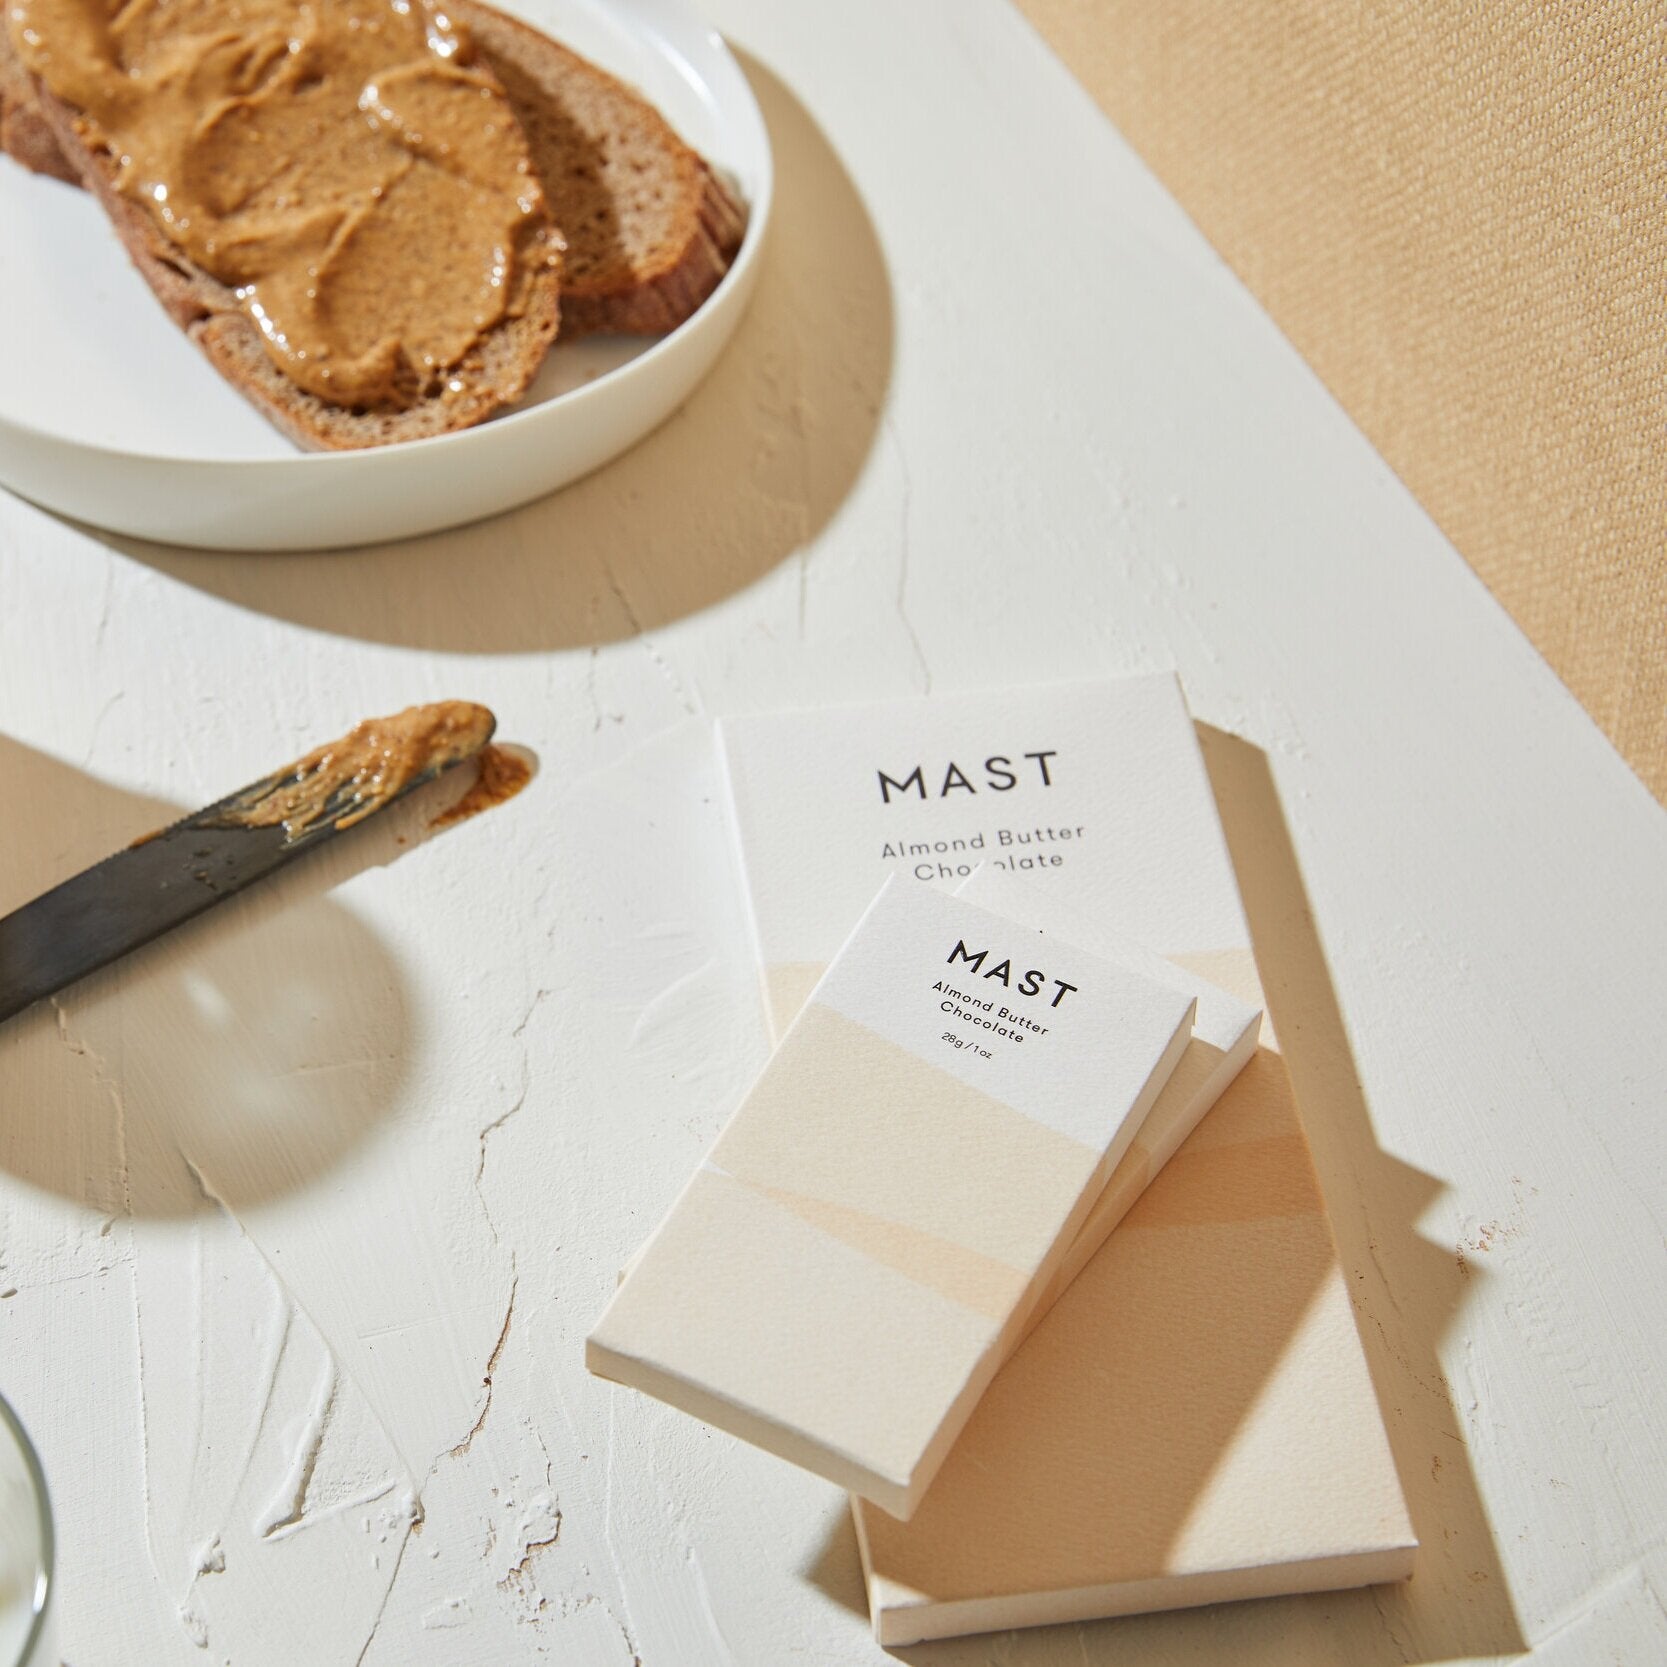 MAST - CLASSIC CHOCOLATE BAR IN ALMOND BUTTER